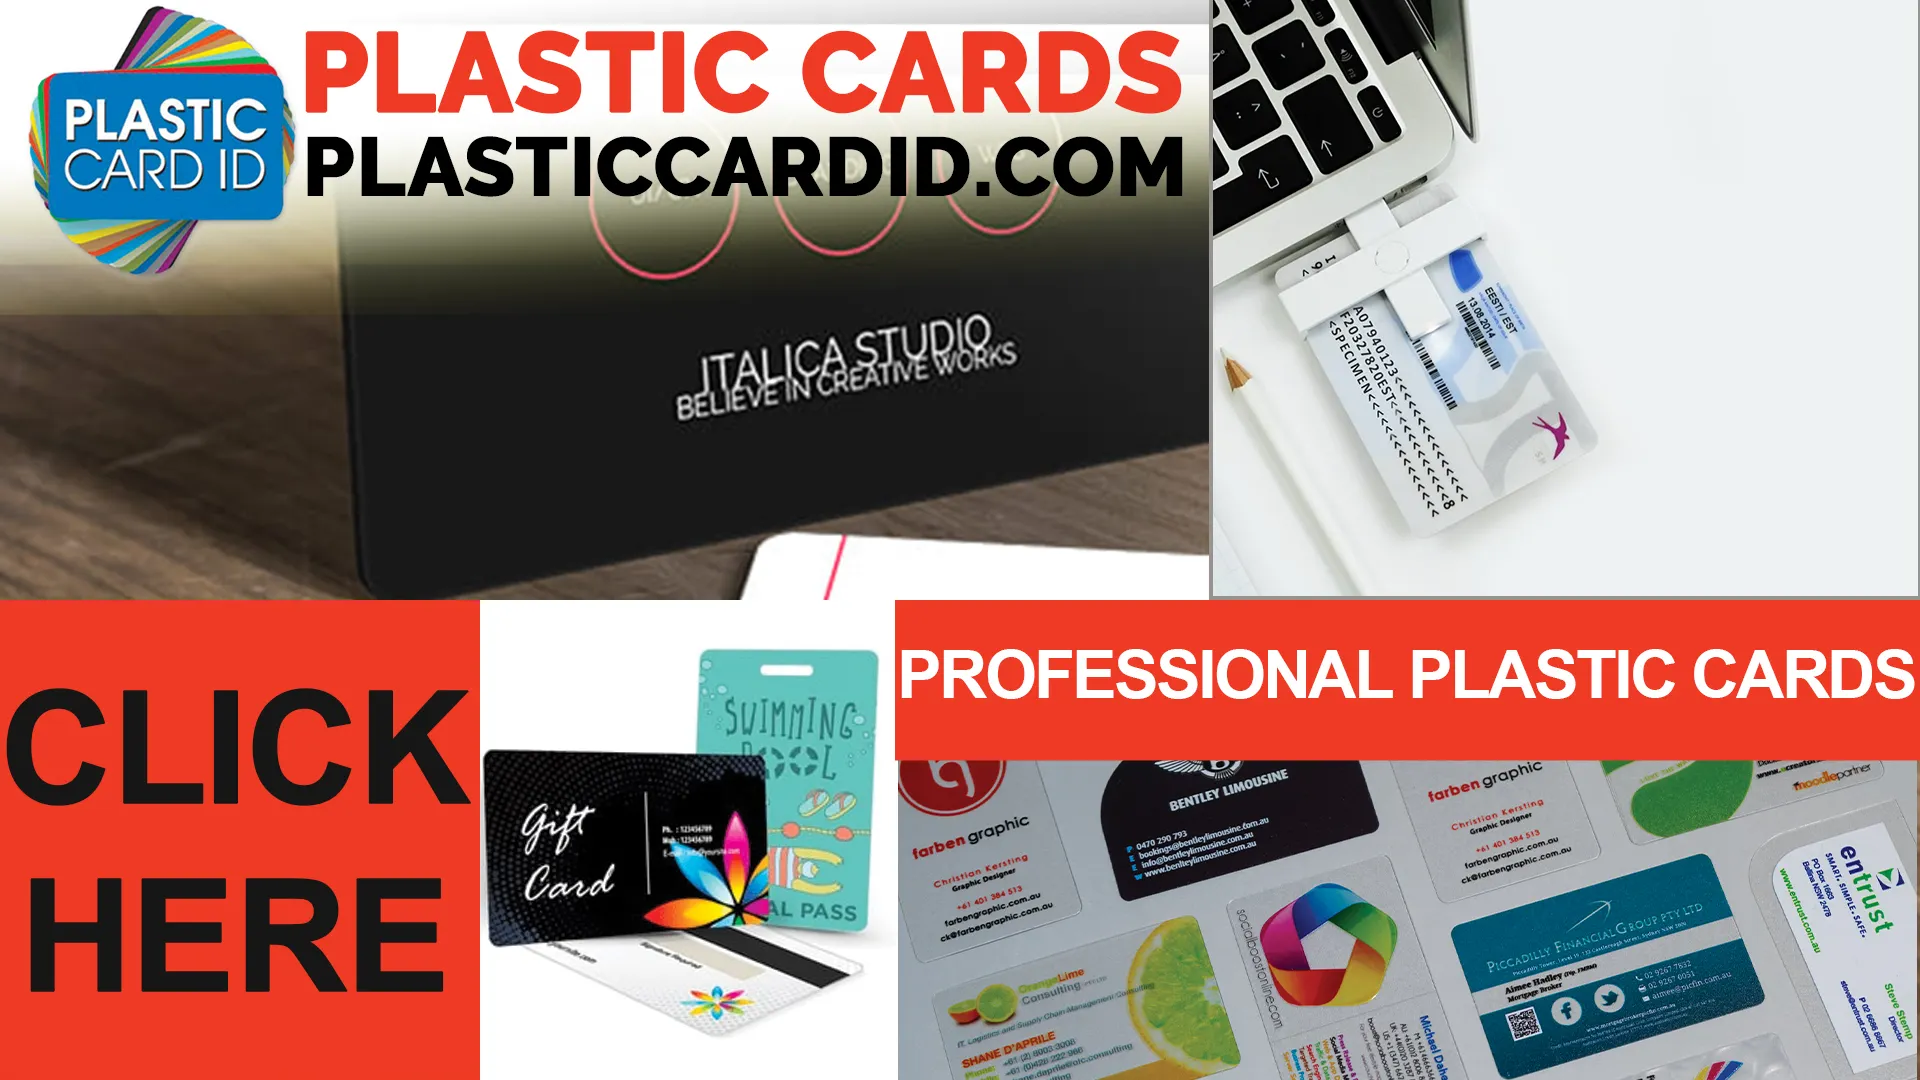 Leading with Eco-Innovation: Our Biodegradable Card Features